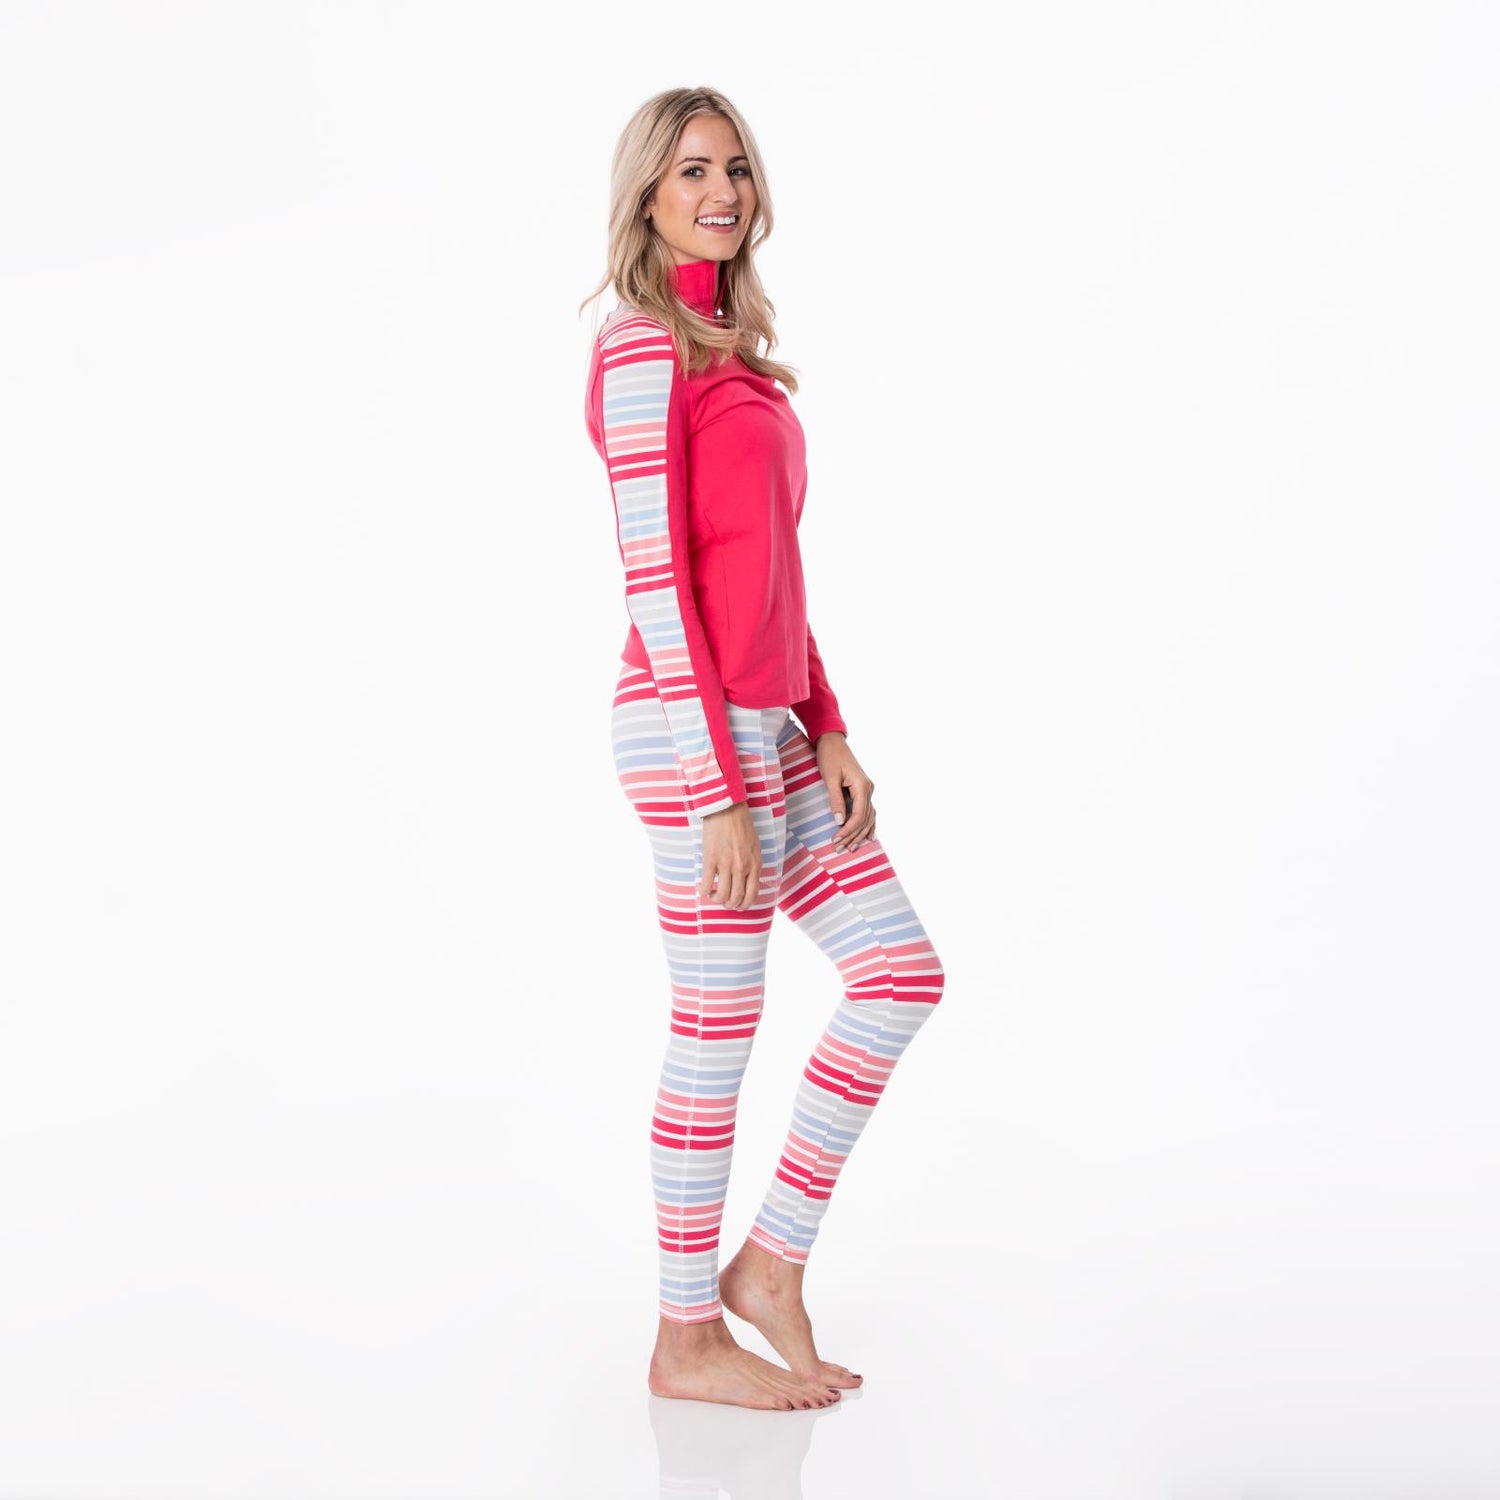 Women's Print Long Sleeve Luxe Sport Tee with Thumbhole in Taffy/Cotton Candy Stripe